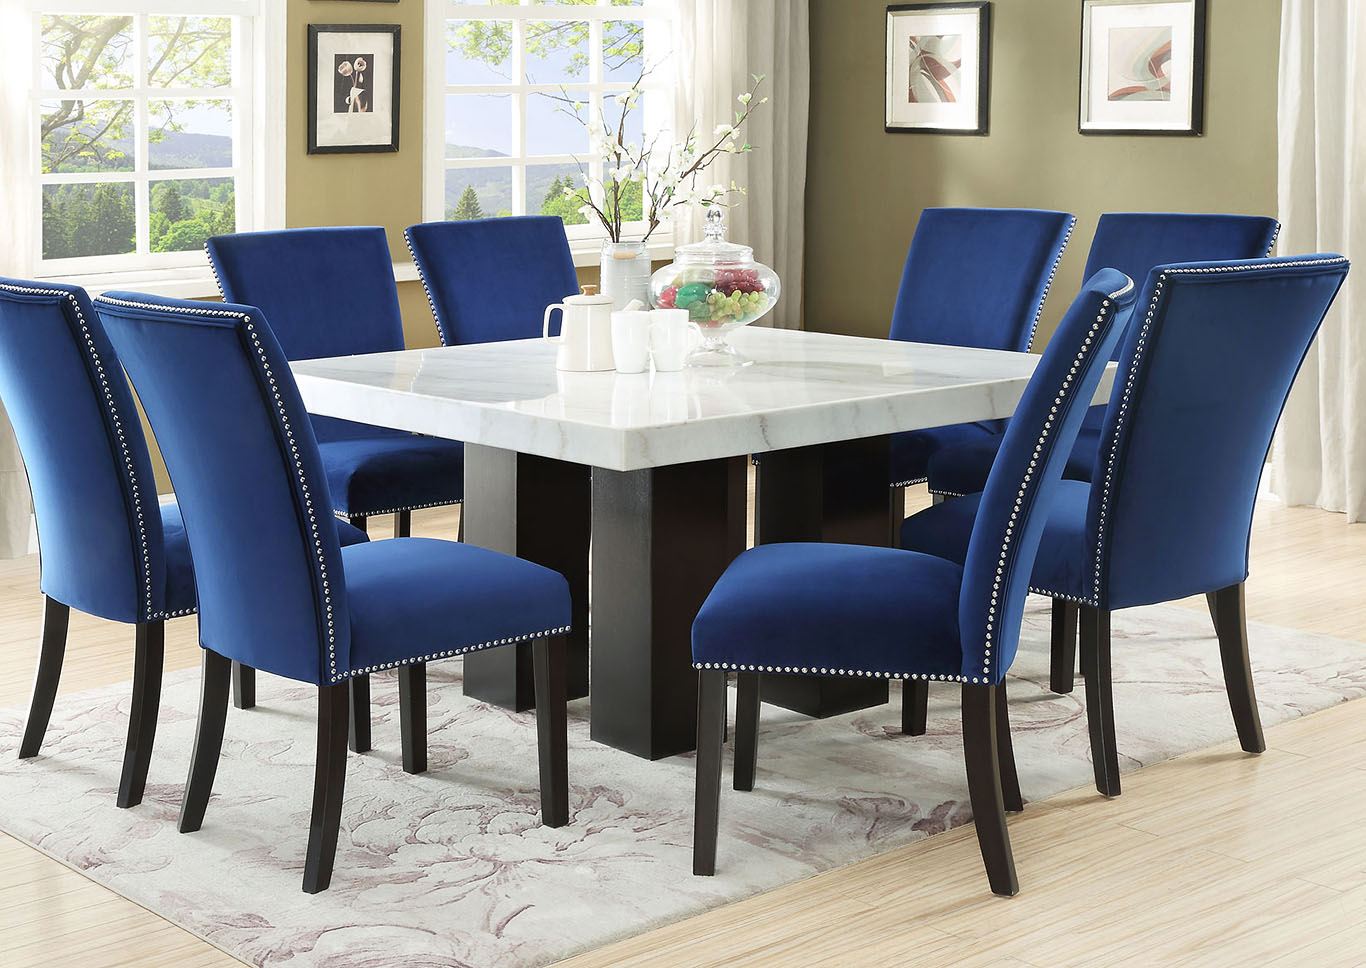 8 chairs in dining room